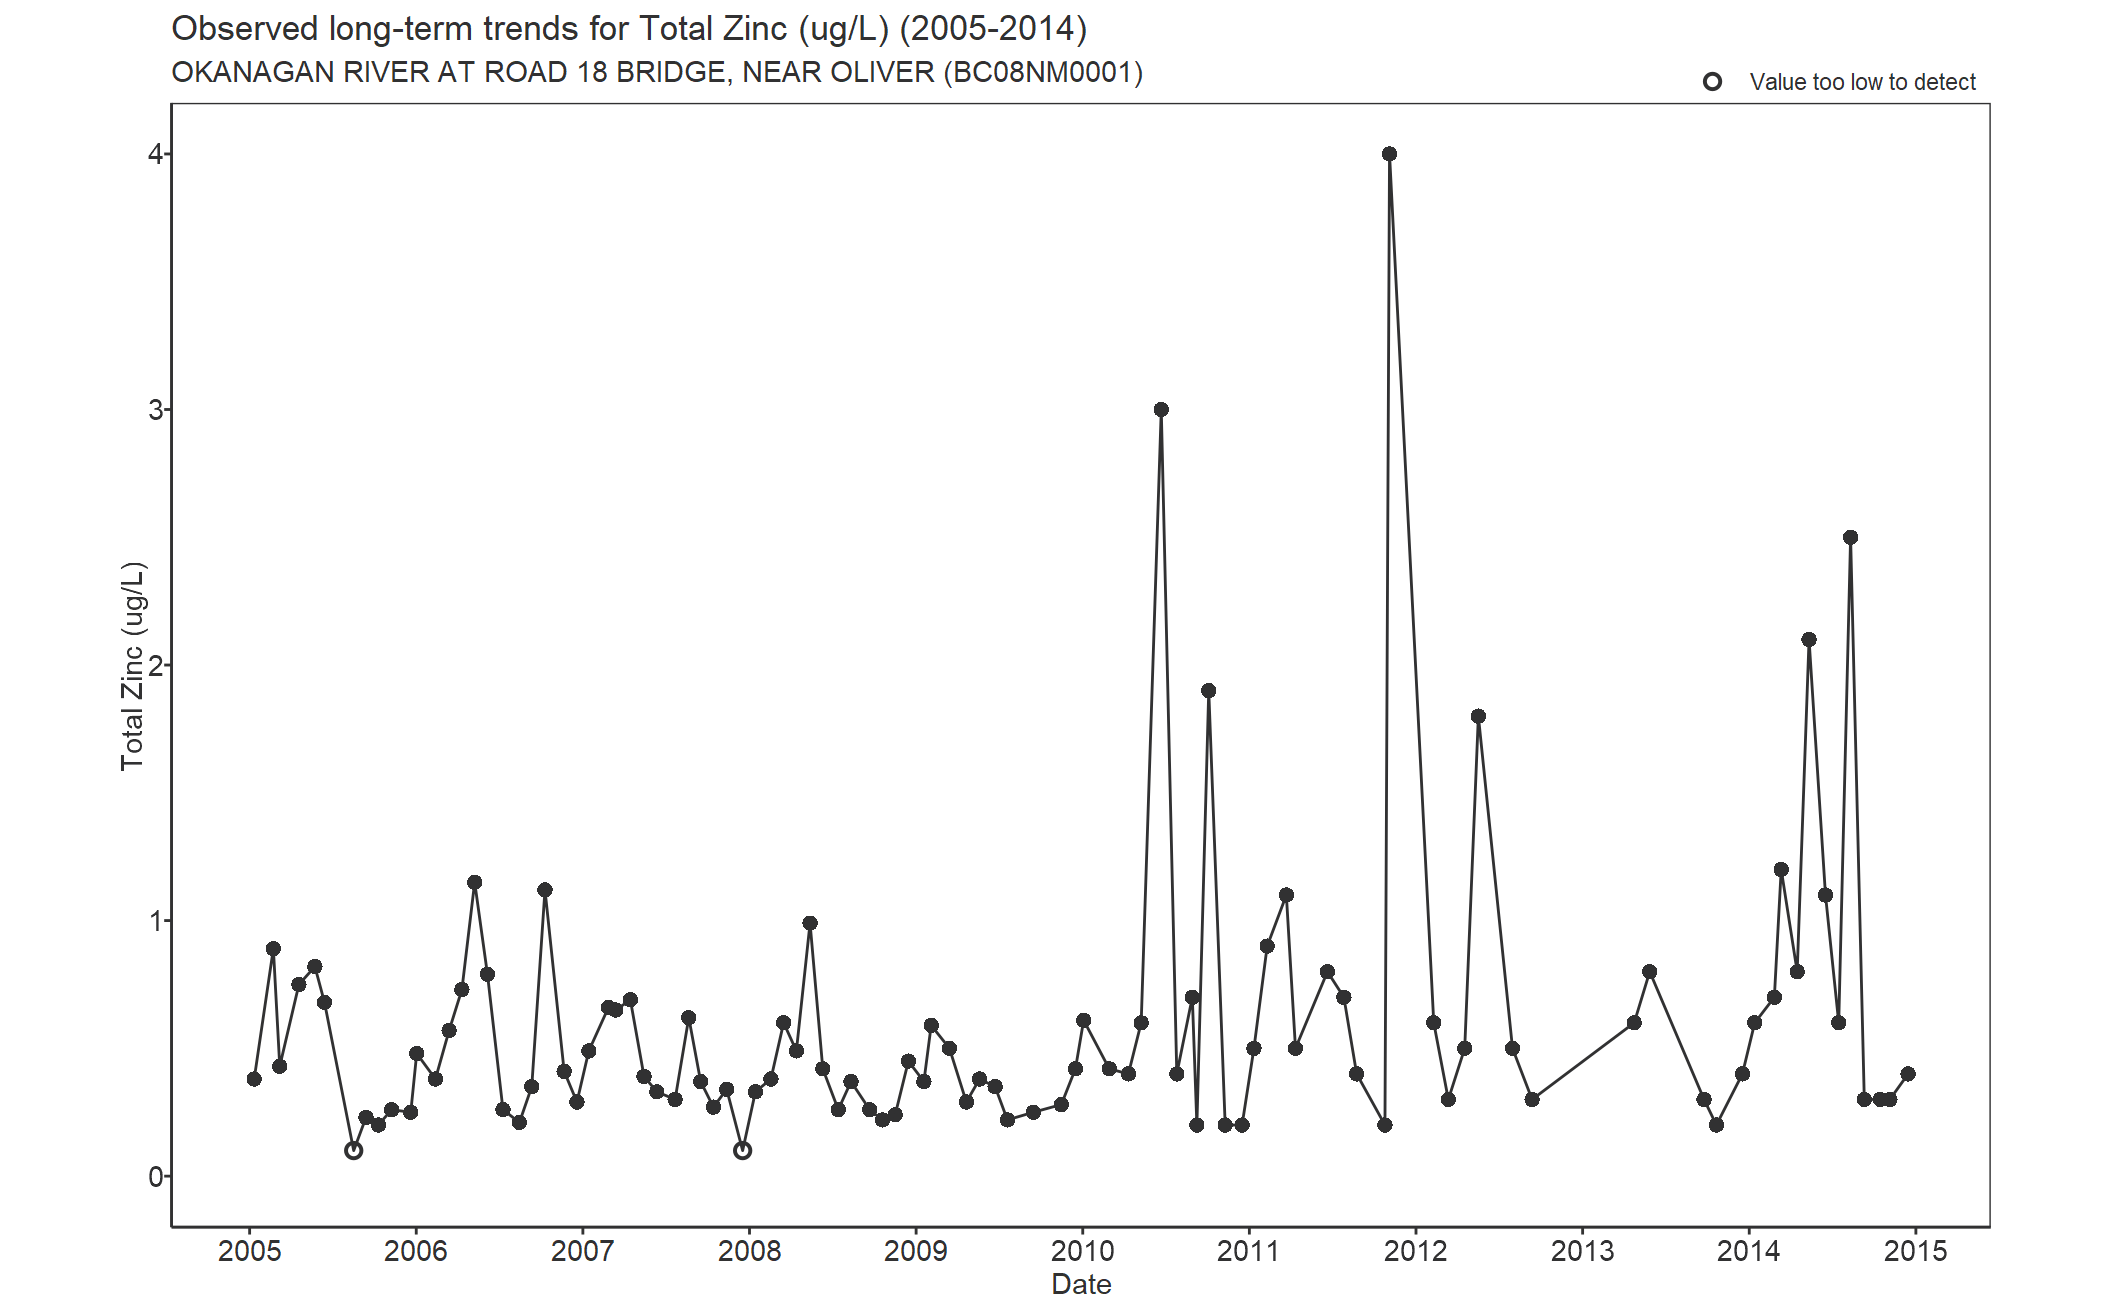 Observed long-term trends for Total Zinc (2005-2014)